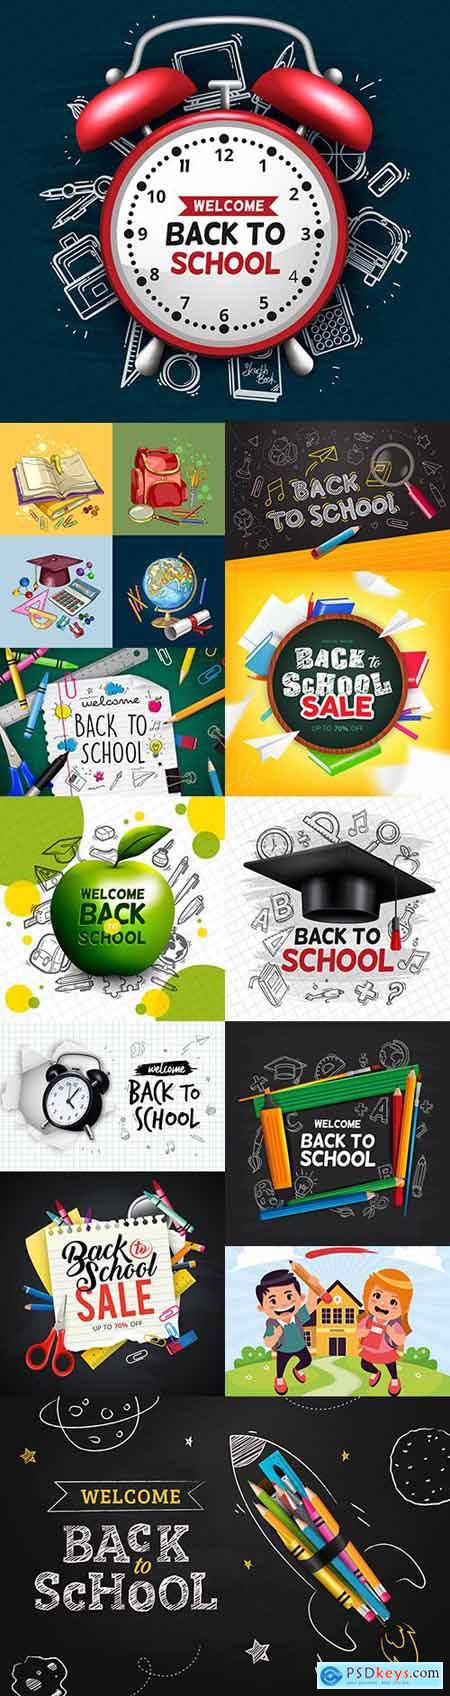 Back to school and accessories collection illustration 40